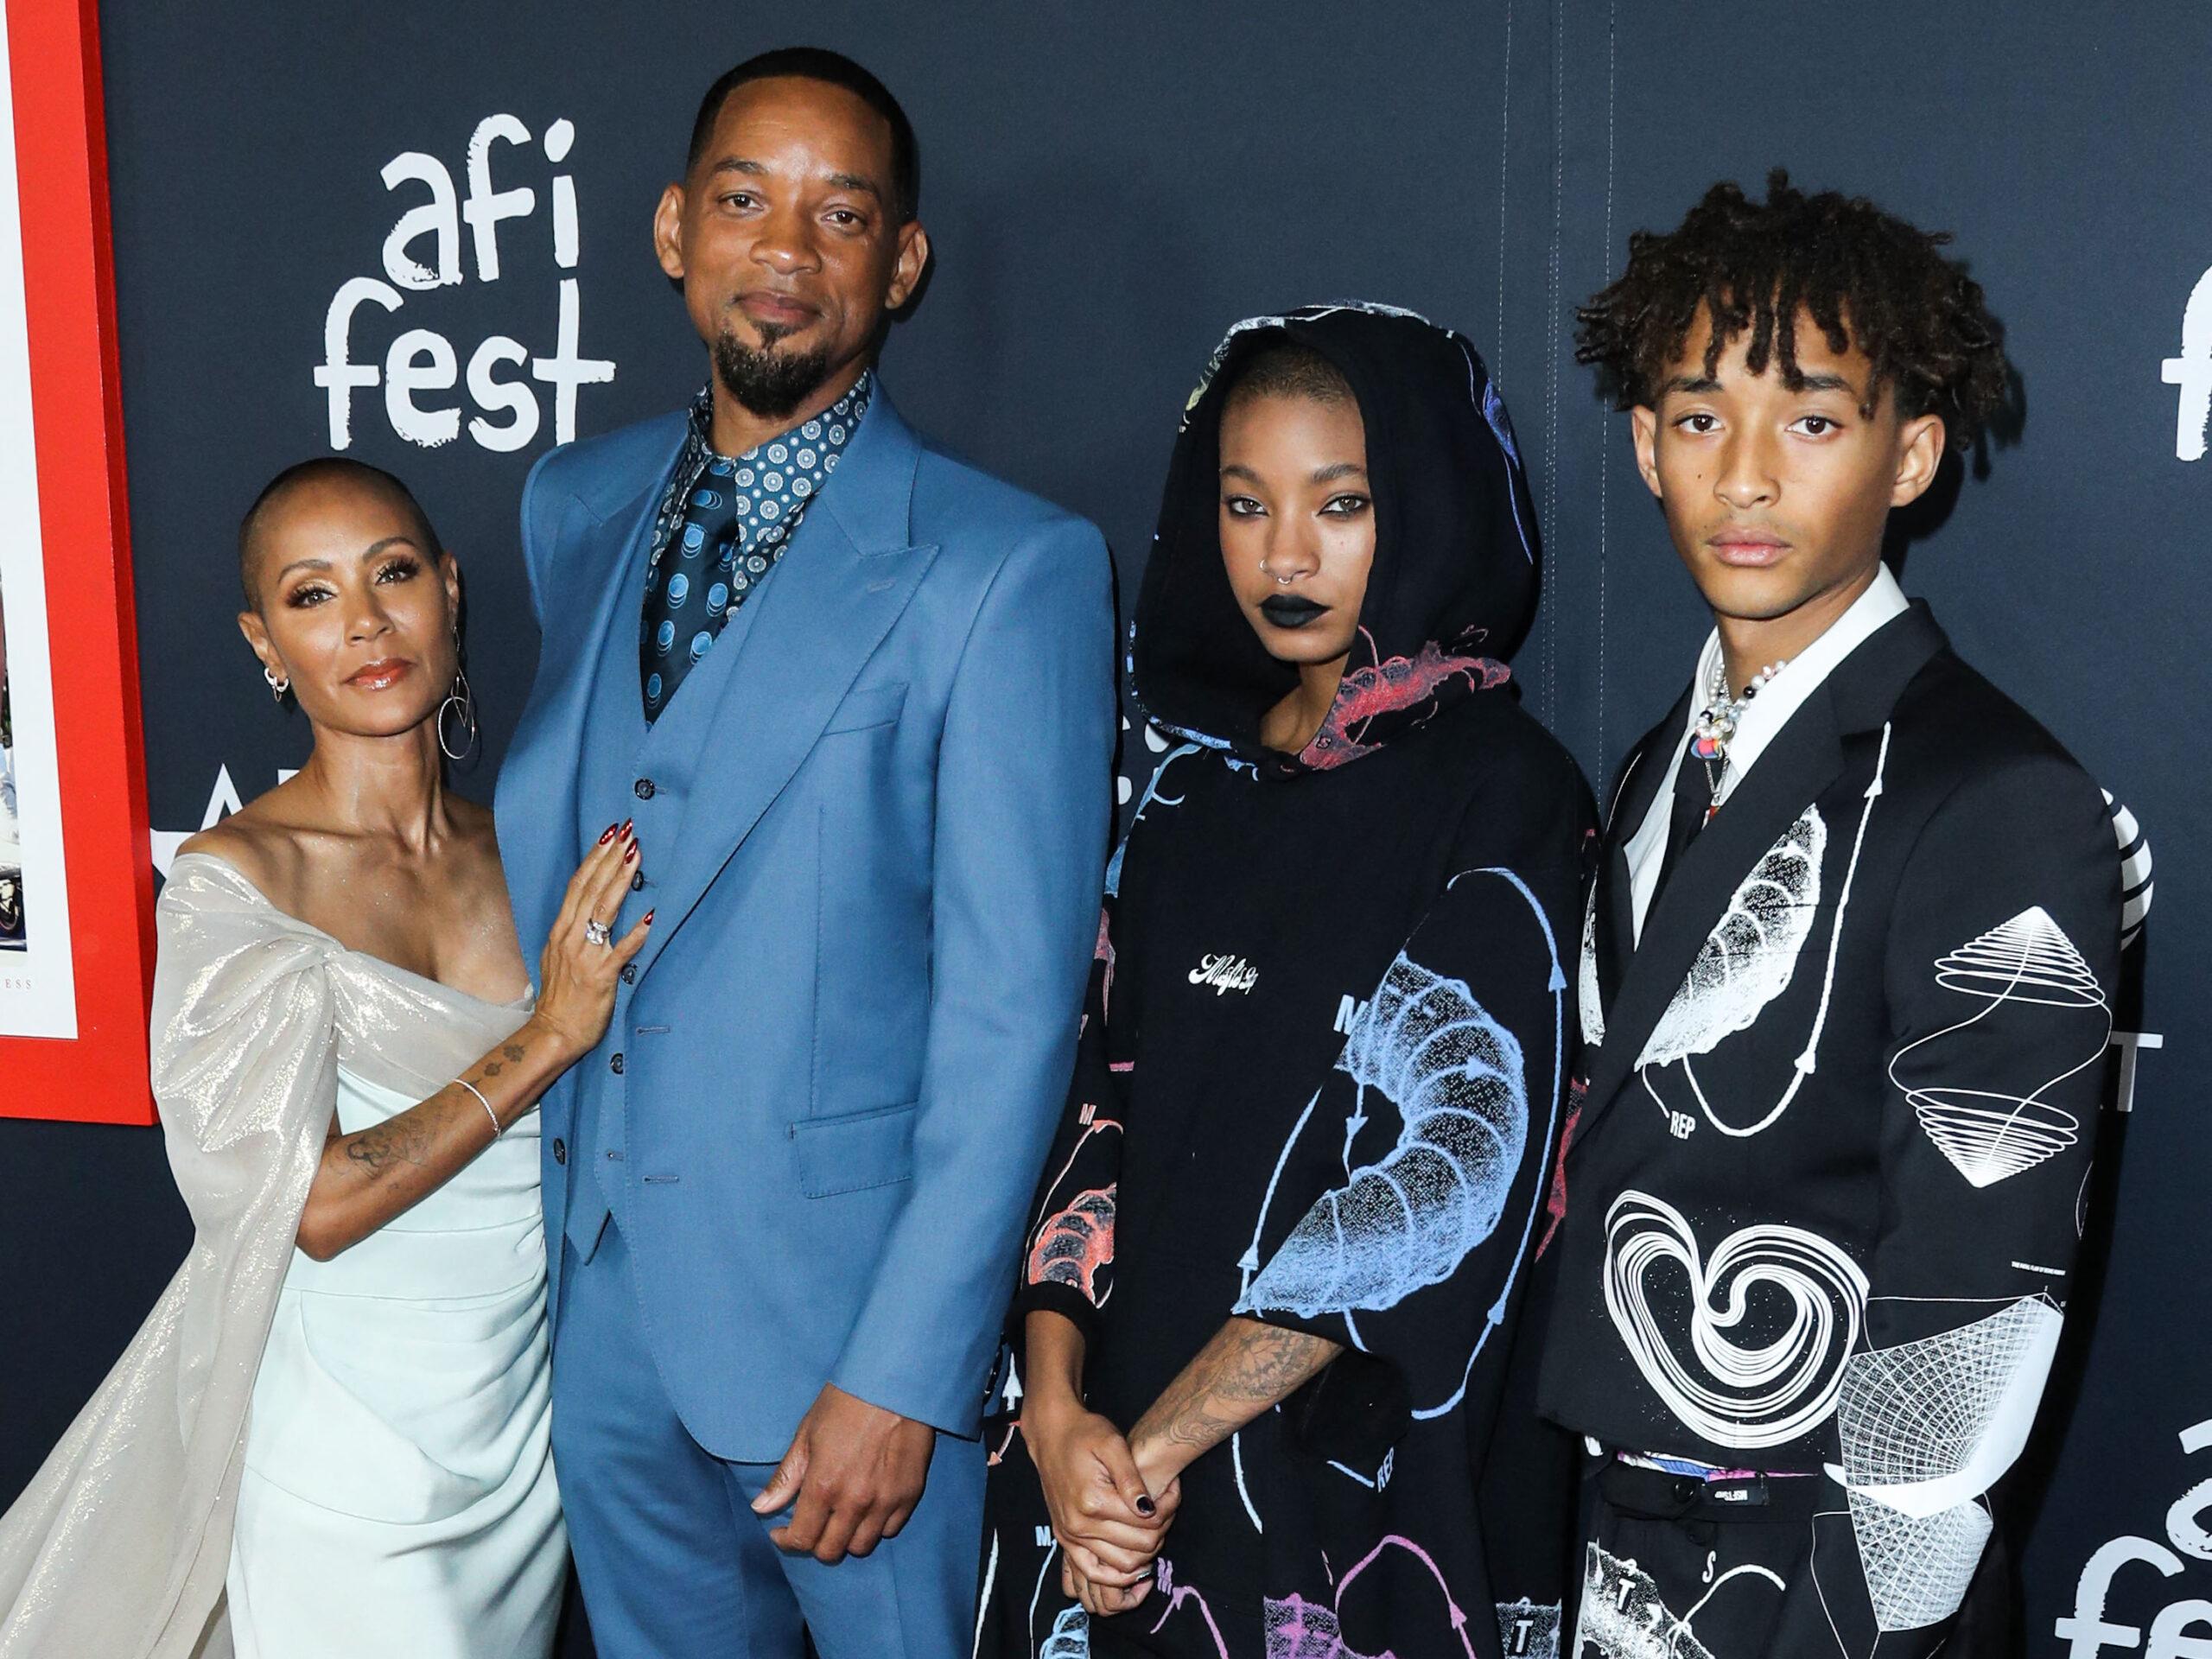 Jada Pinkett Smith, Will Smith, Willow Smith and Jaden Smith arrive at the 2021 AFI Fest - Closing Night Premiere Of Warner Bros. Pictures' 'King Richard'